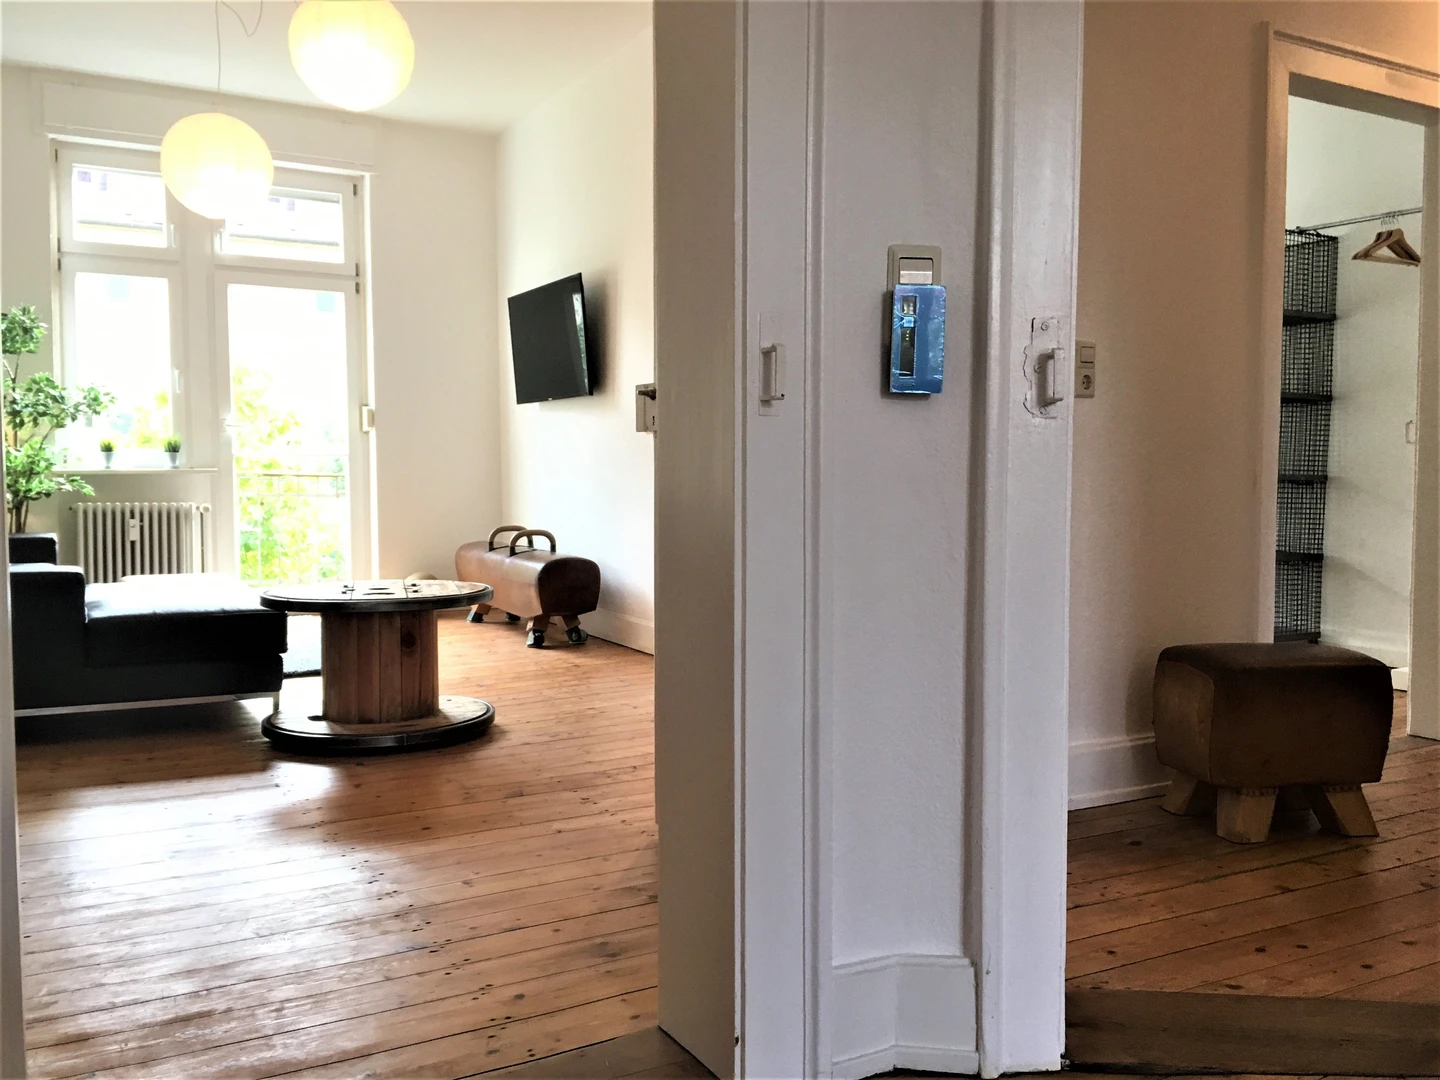 Cheap private room in Karlsruhe